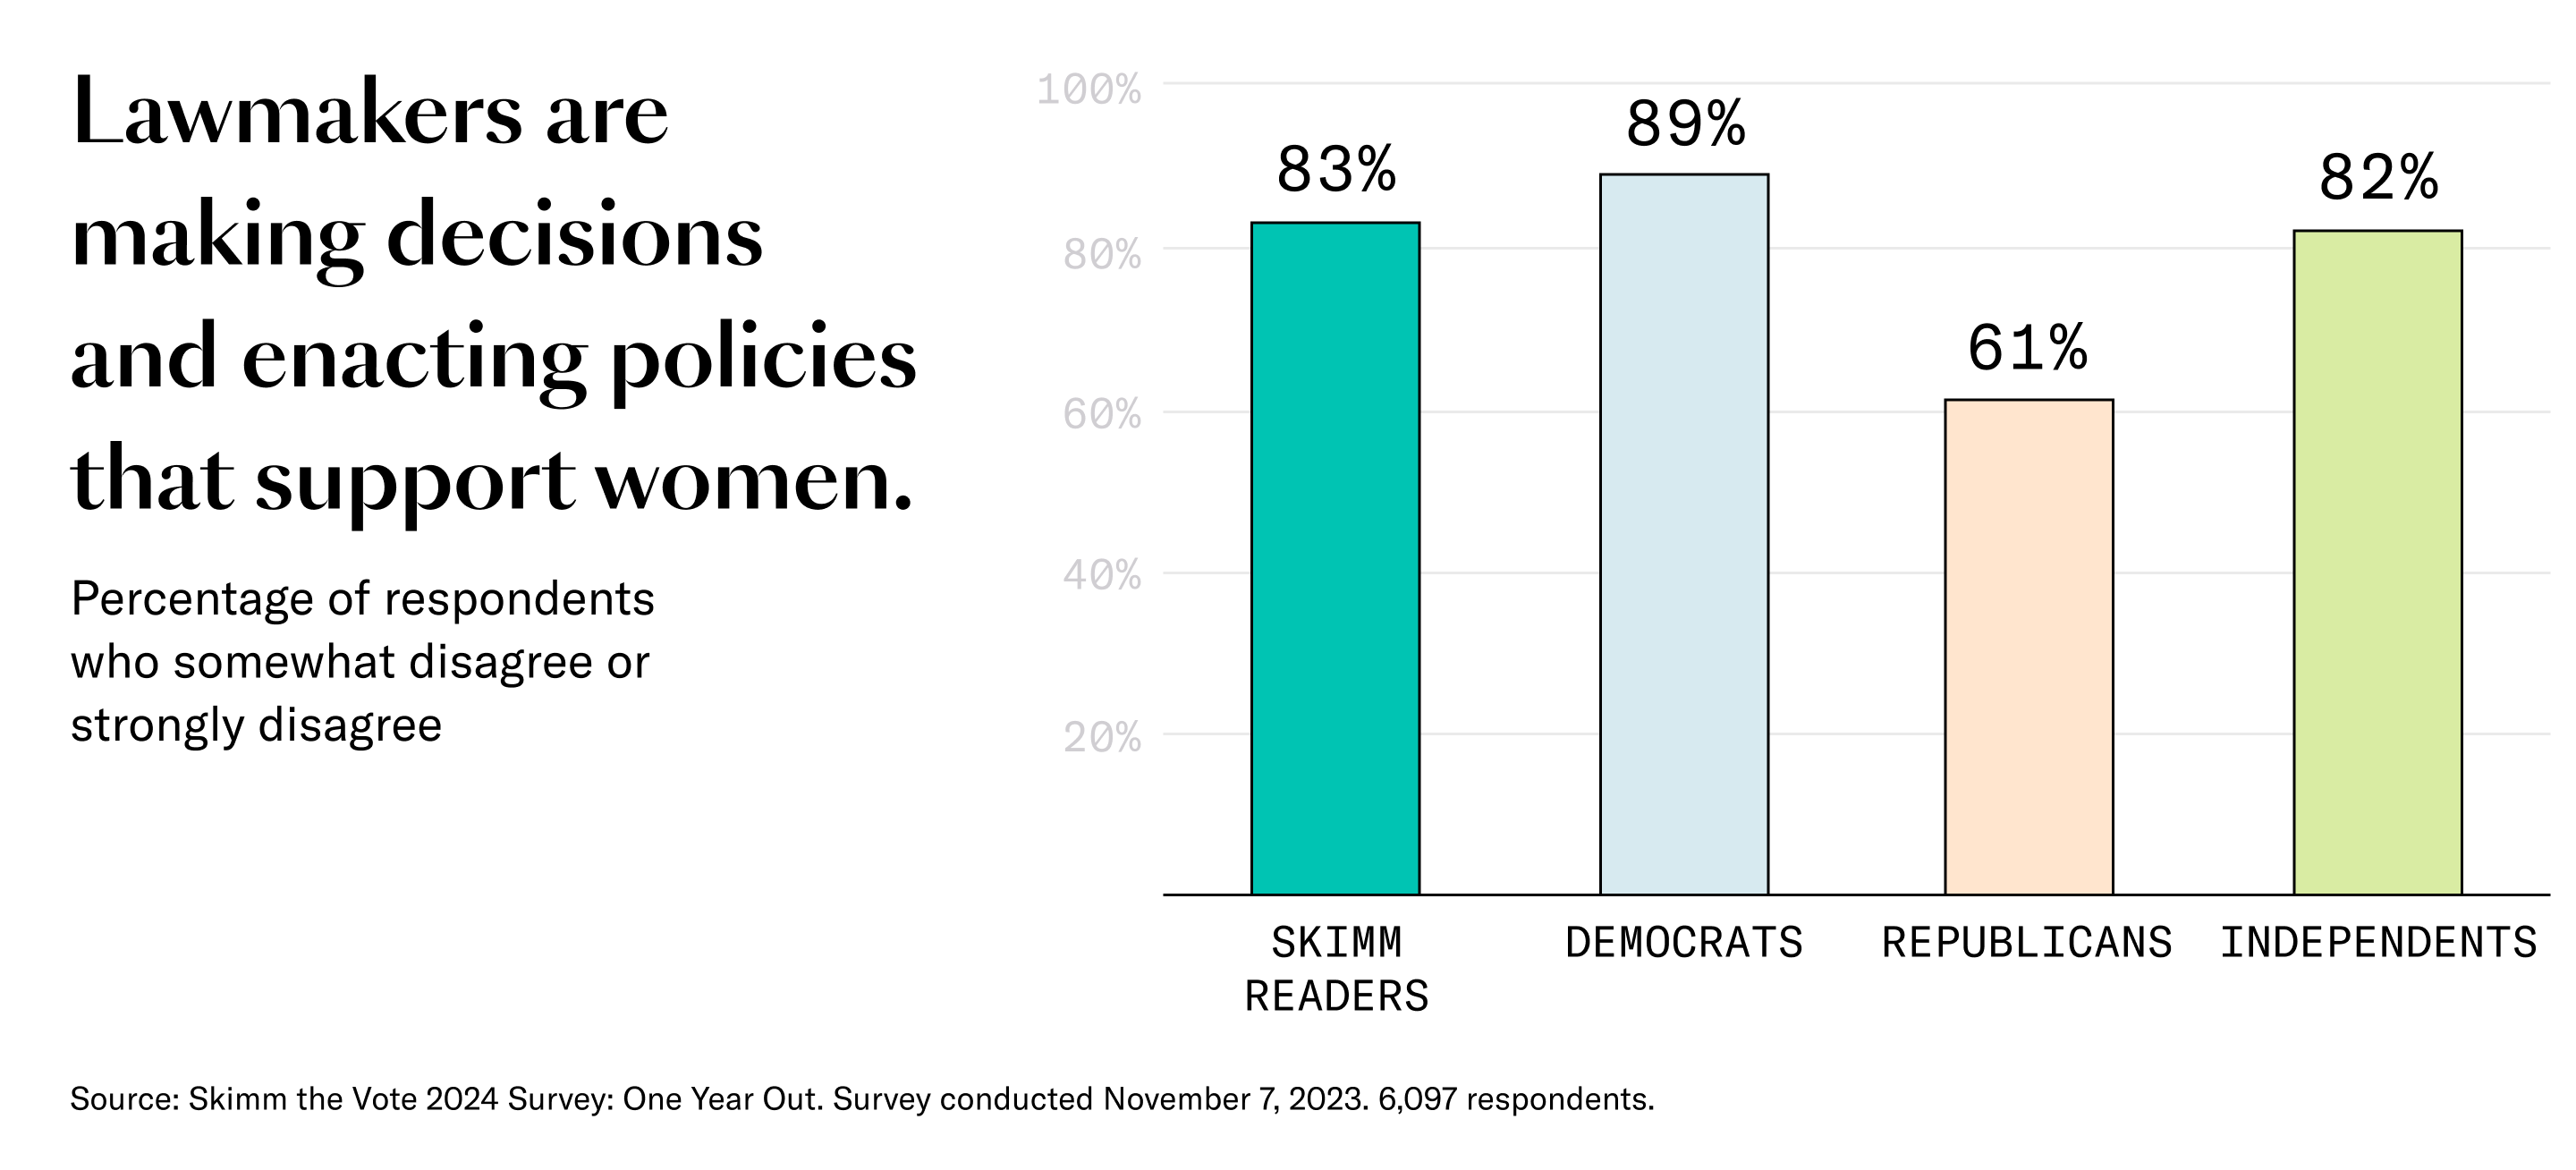 Most respondents think lawmakers aren't making decisions and enacting policies that support women.